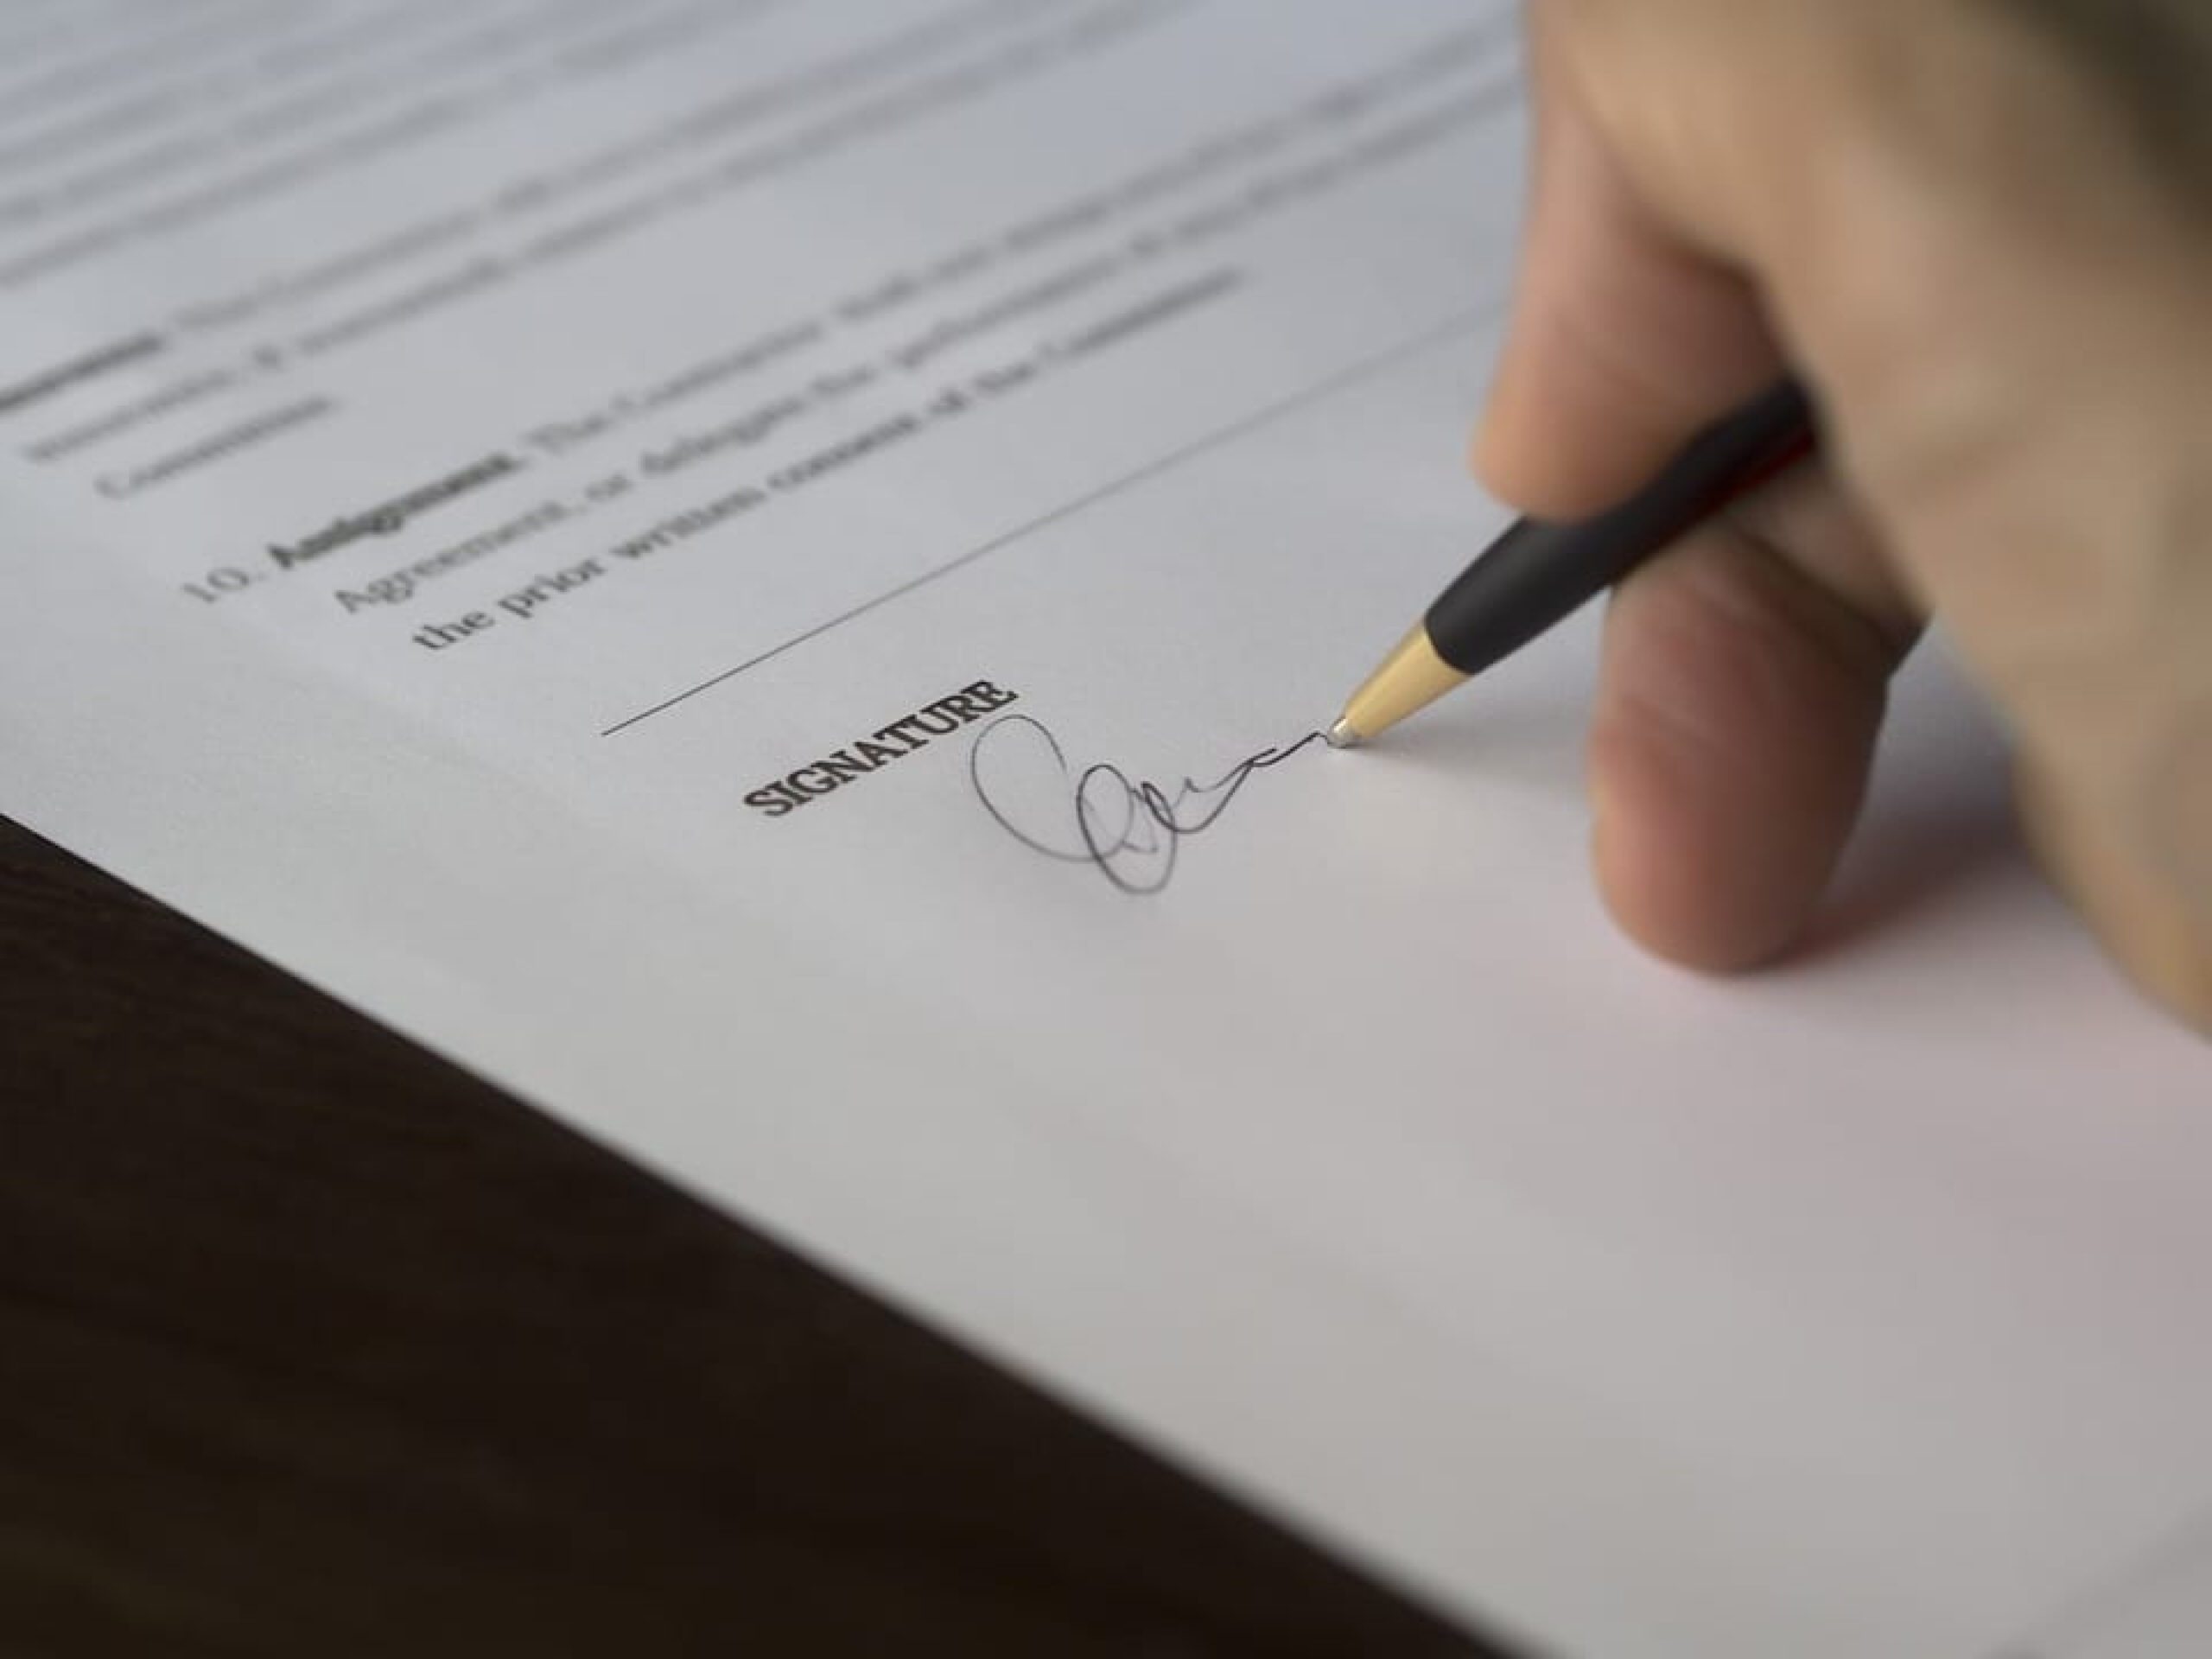 The New Ontario Standard Lease Agreement – 5 Things Every Landlord Should Know